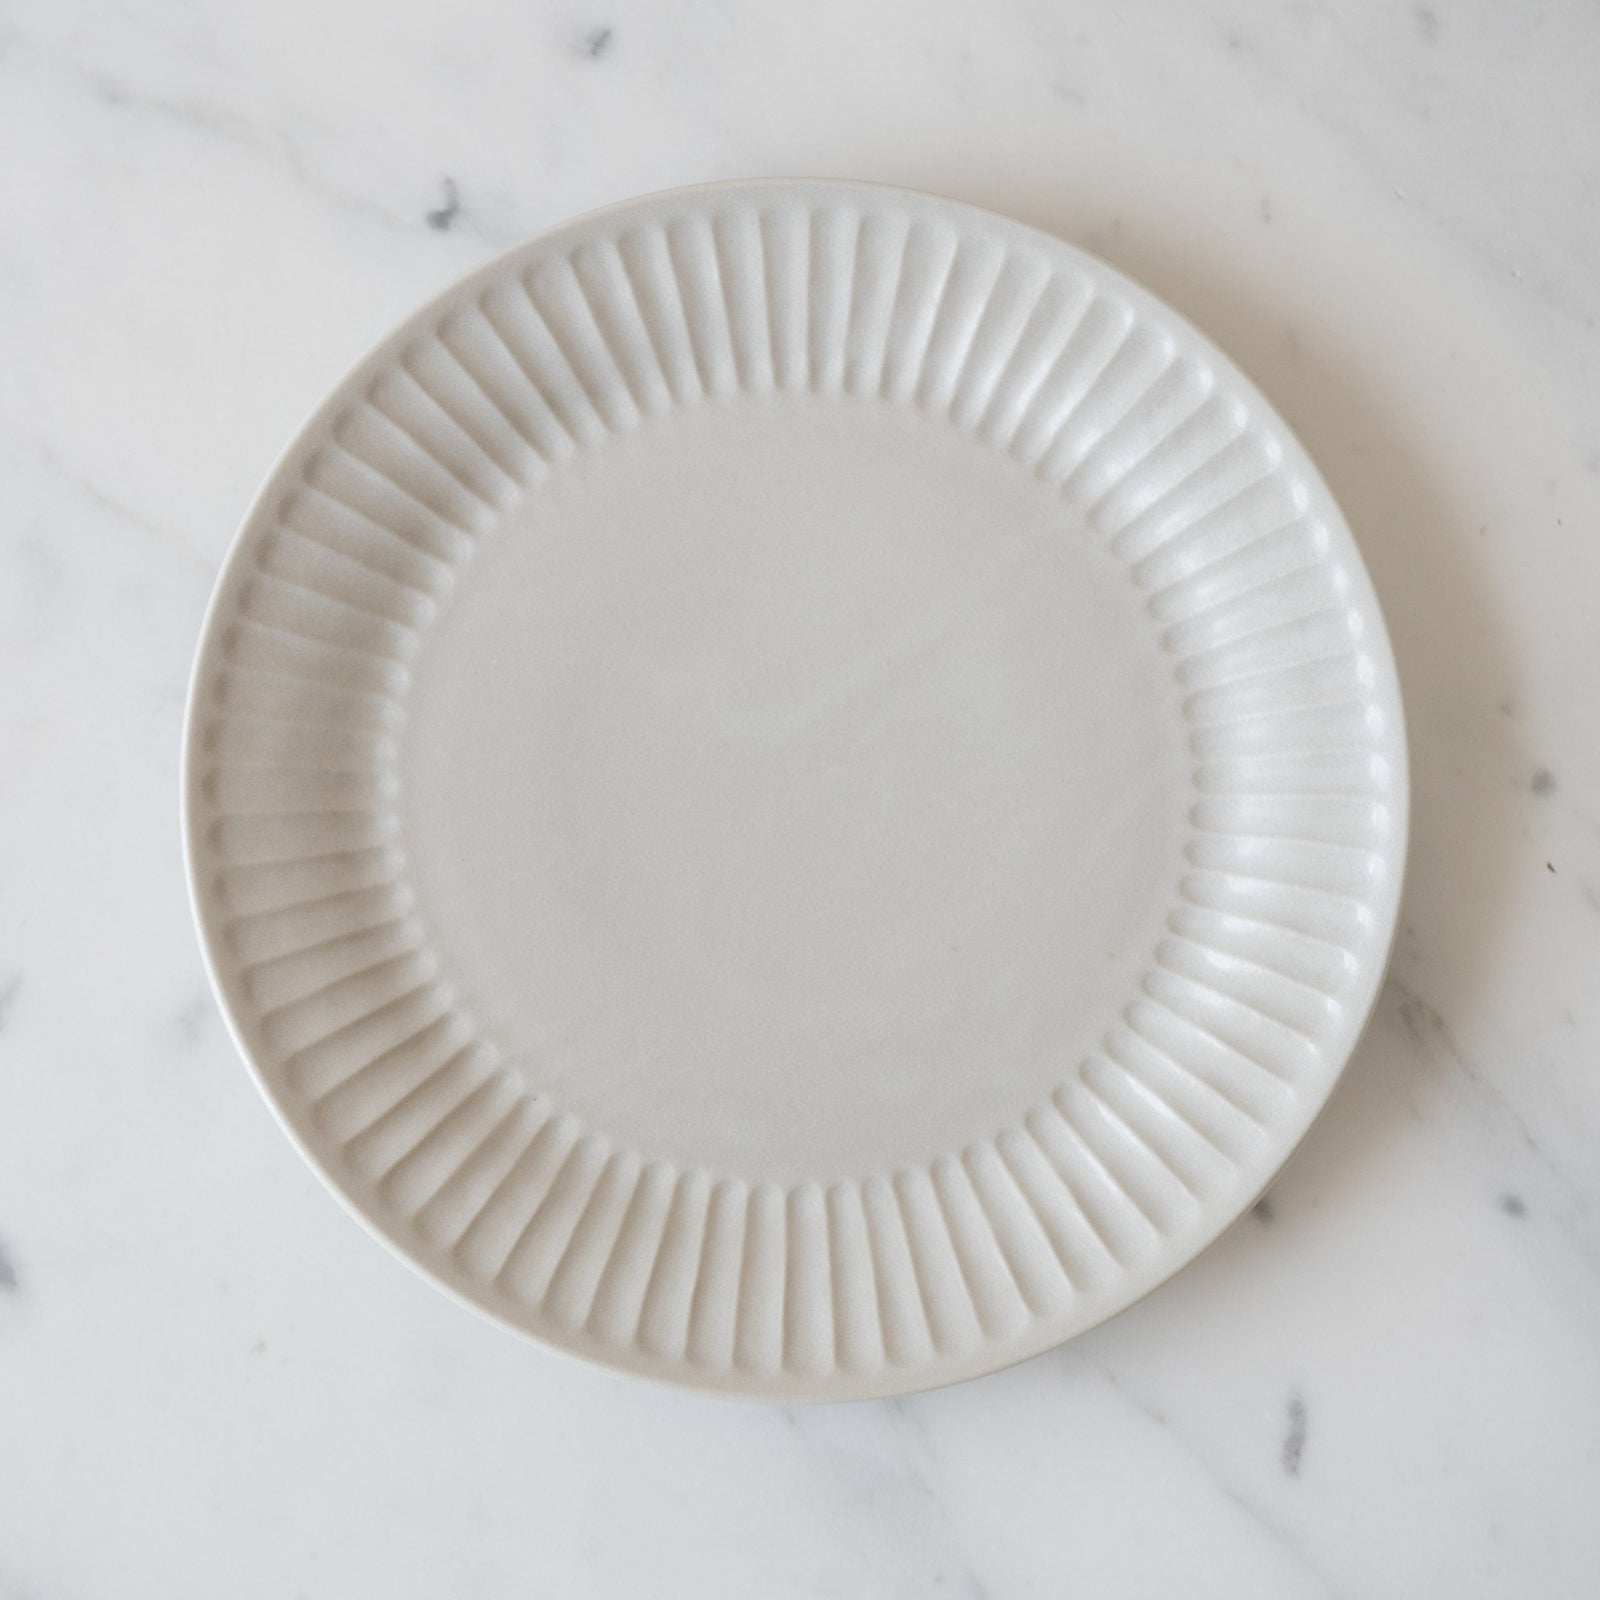 Japanese Fluted Plate - 3 sizes